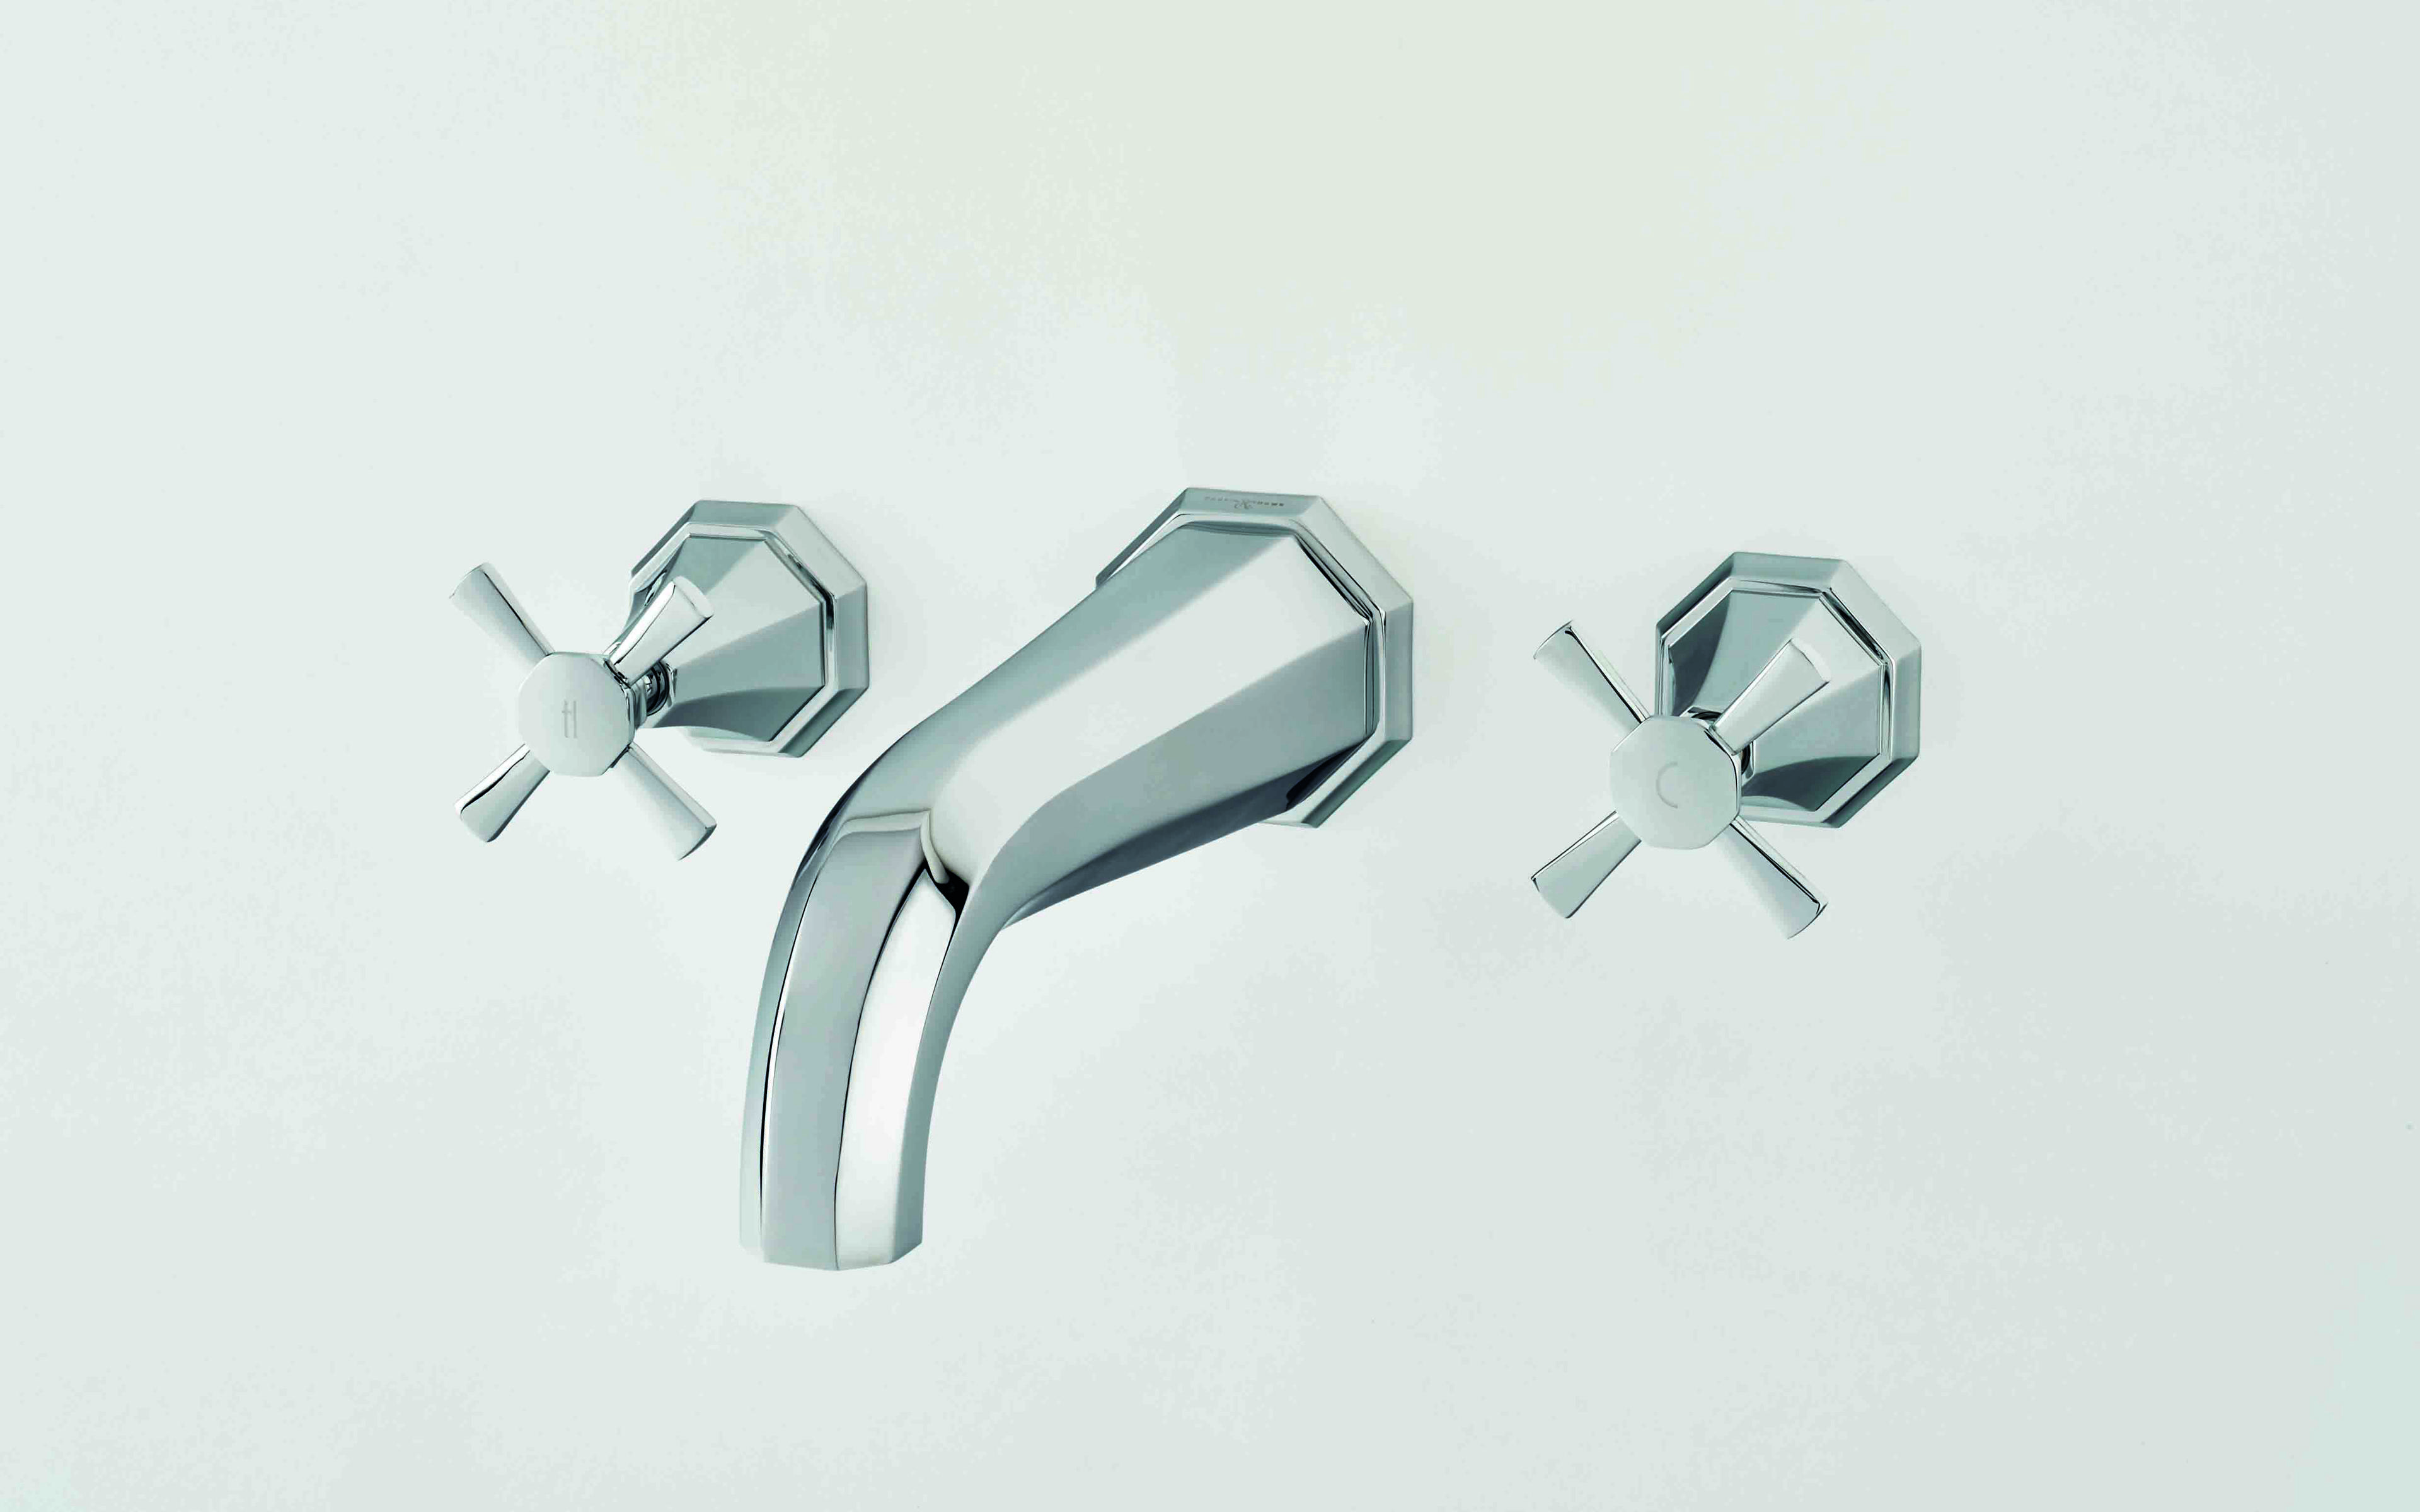 Deco Three-Hole Wall-Mounted Bath Filler with Crosstop Handles - Chrome